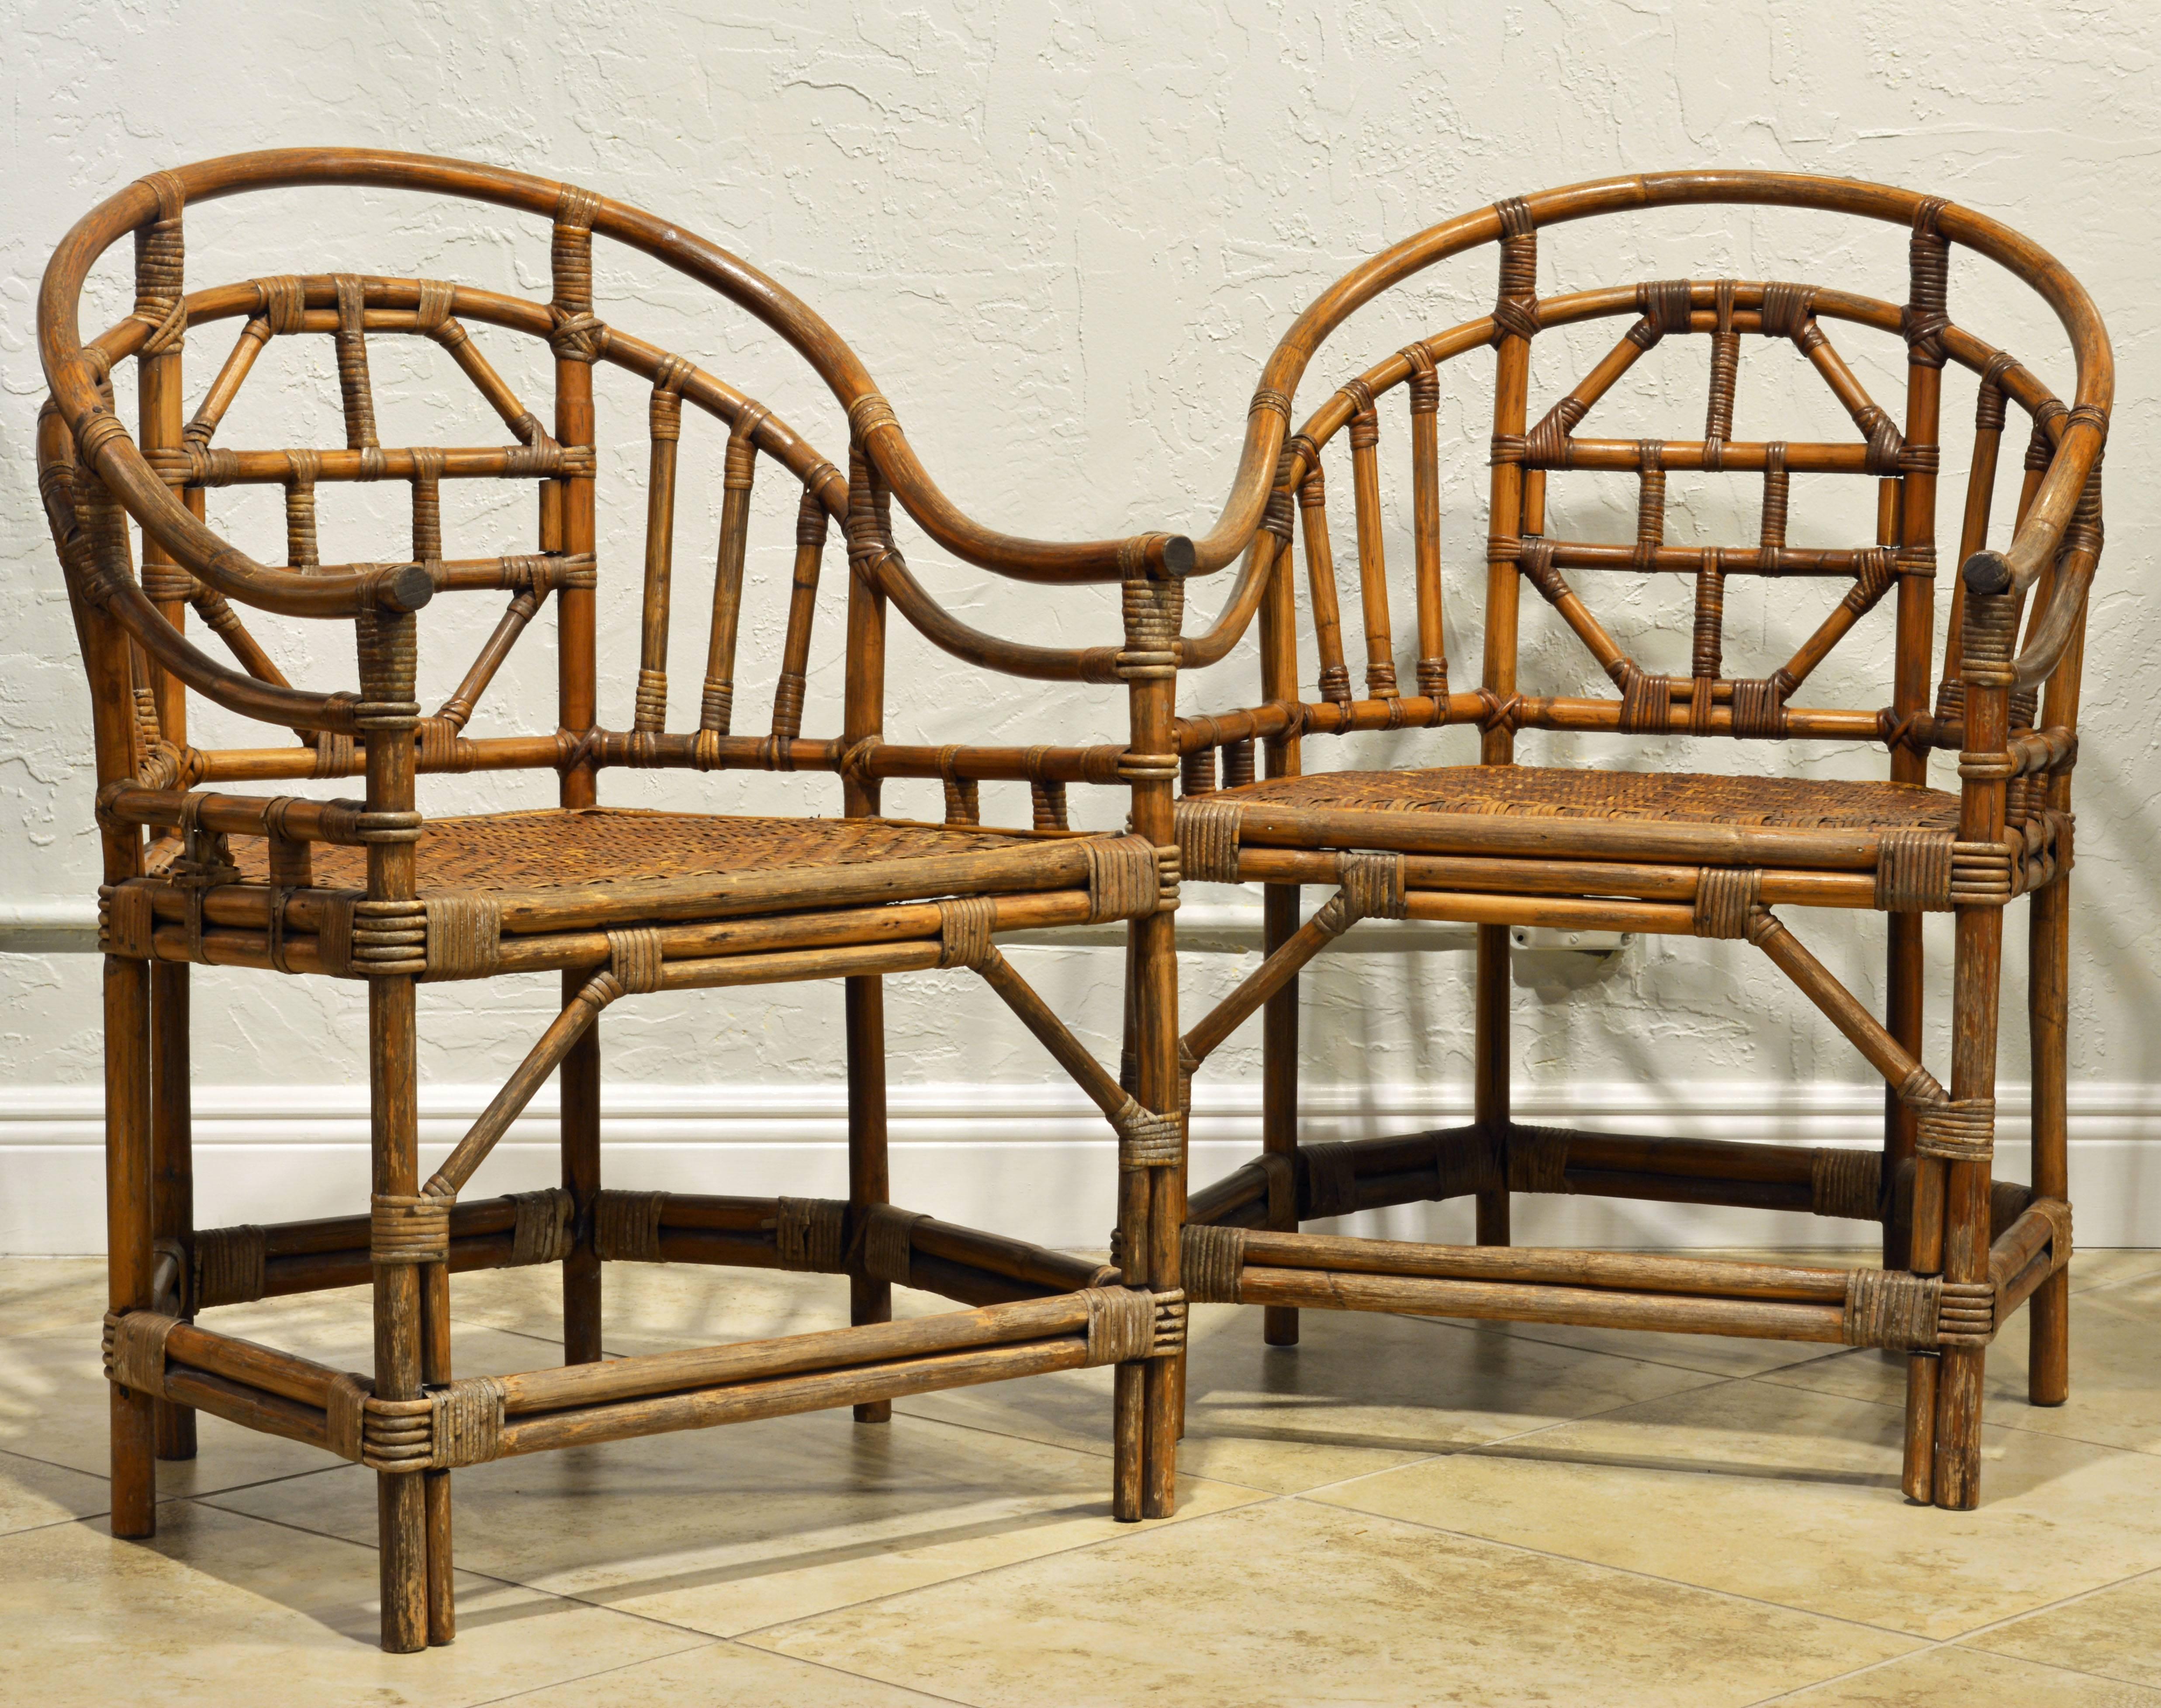 These decorative vintage chairs continue the horse shoe back form of the Ming Dynasty translated into a European influenced Chippendale style bamboo or rattan design. Extremely well made and sturdy with woven cane seats the chairs come with